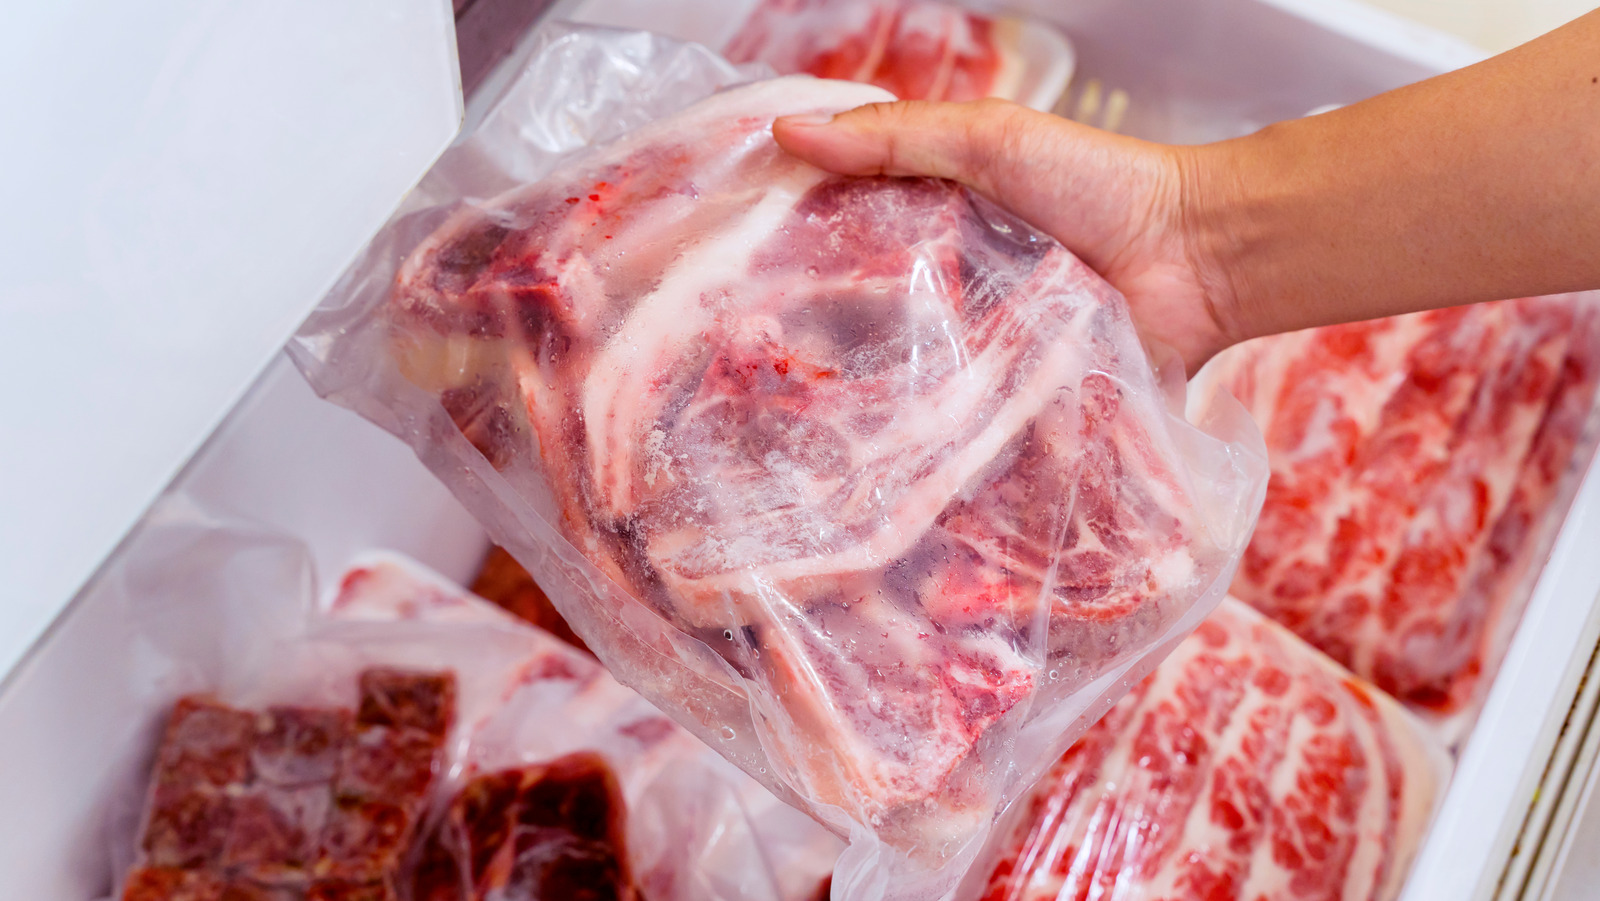 https://www.thedailymeal.com/img/gallery/youve-been-storing-meats-wrong-your-entire-life/l-intro-1675367450.jpg